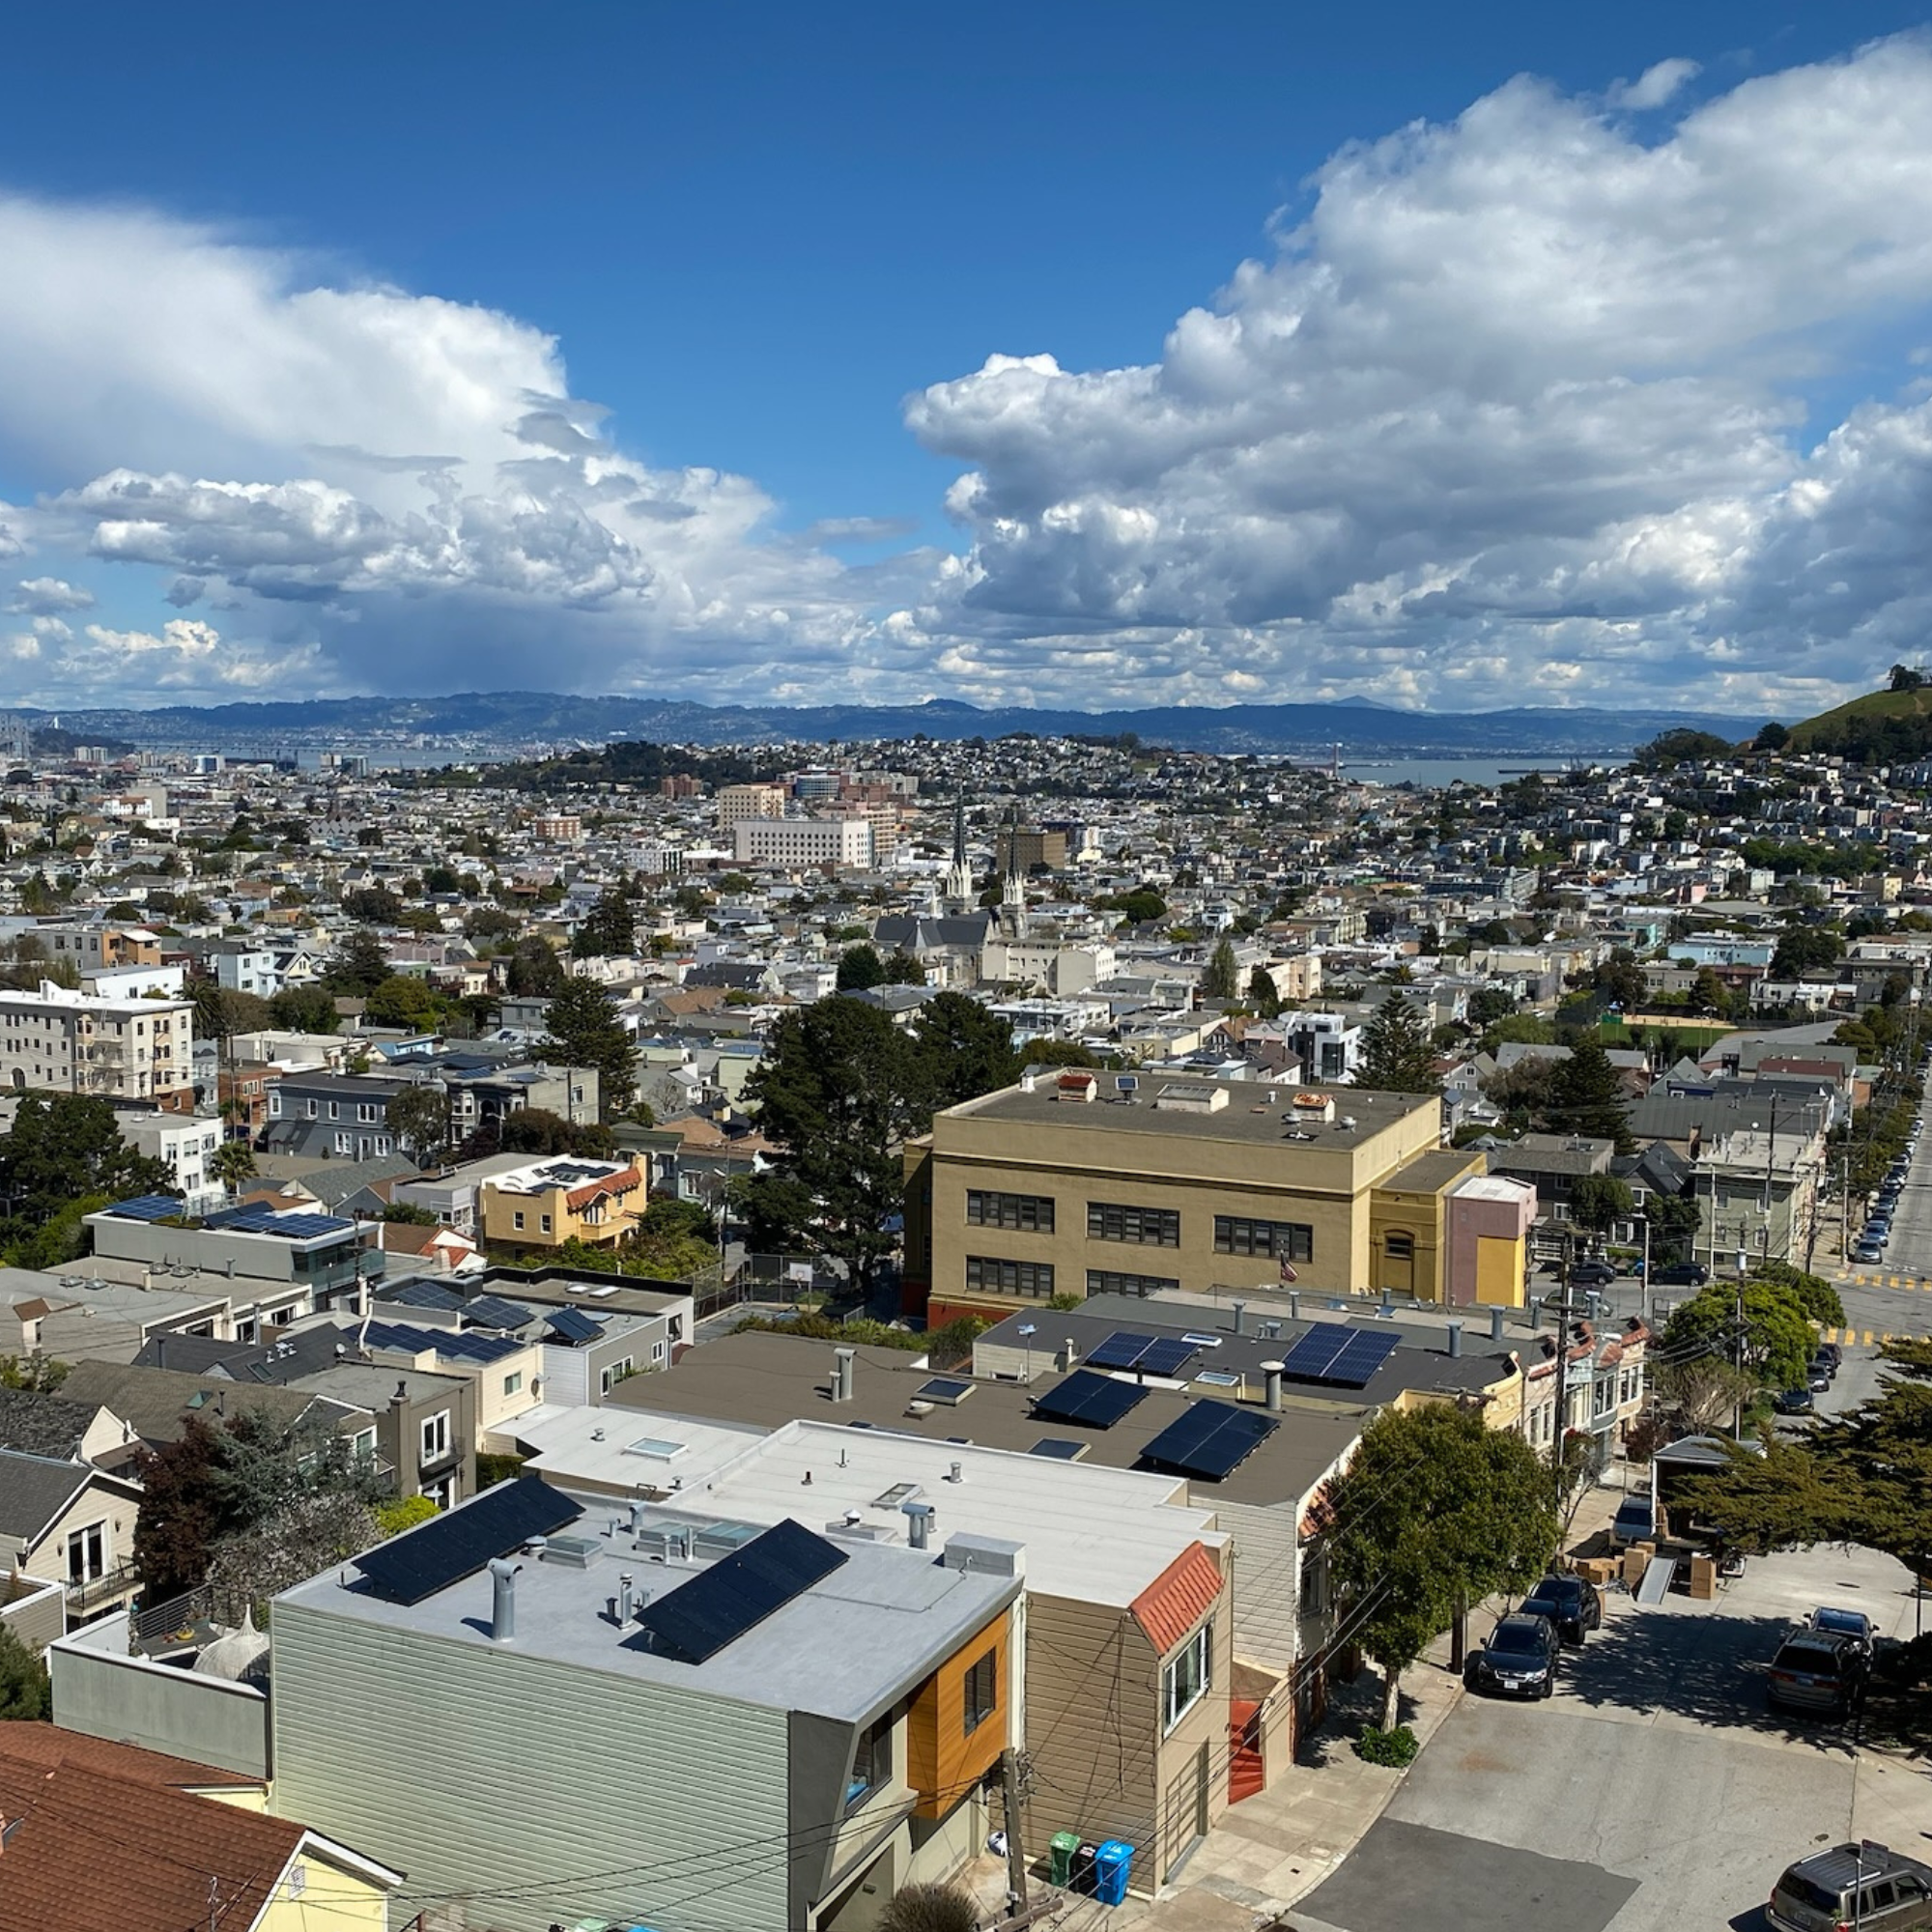 A view of the city of San Francisco with a hill to the far right of the image and the tops of residential buildings and homes in the foreground